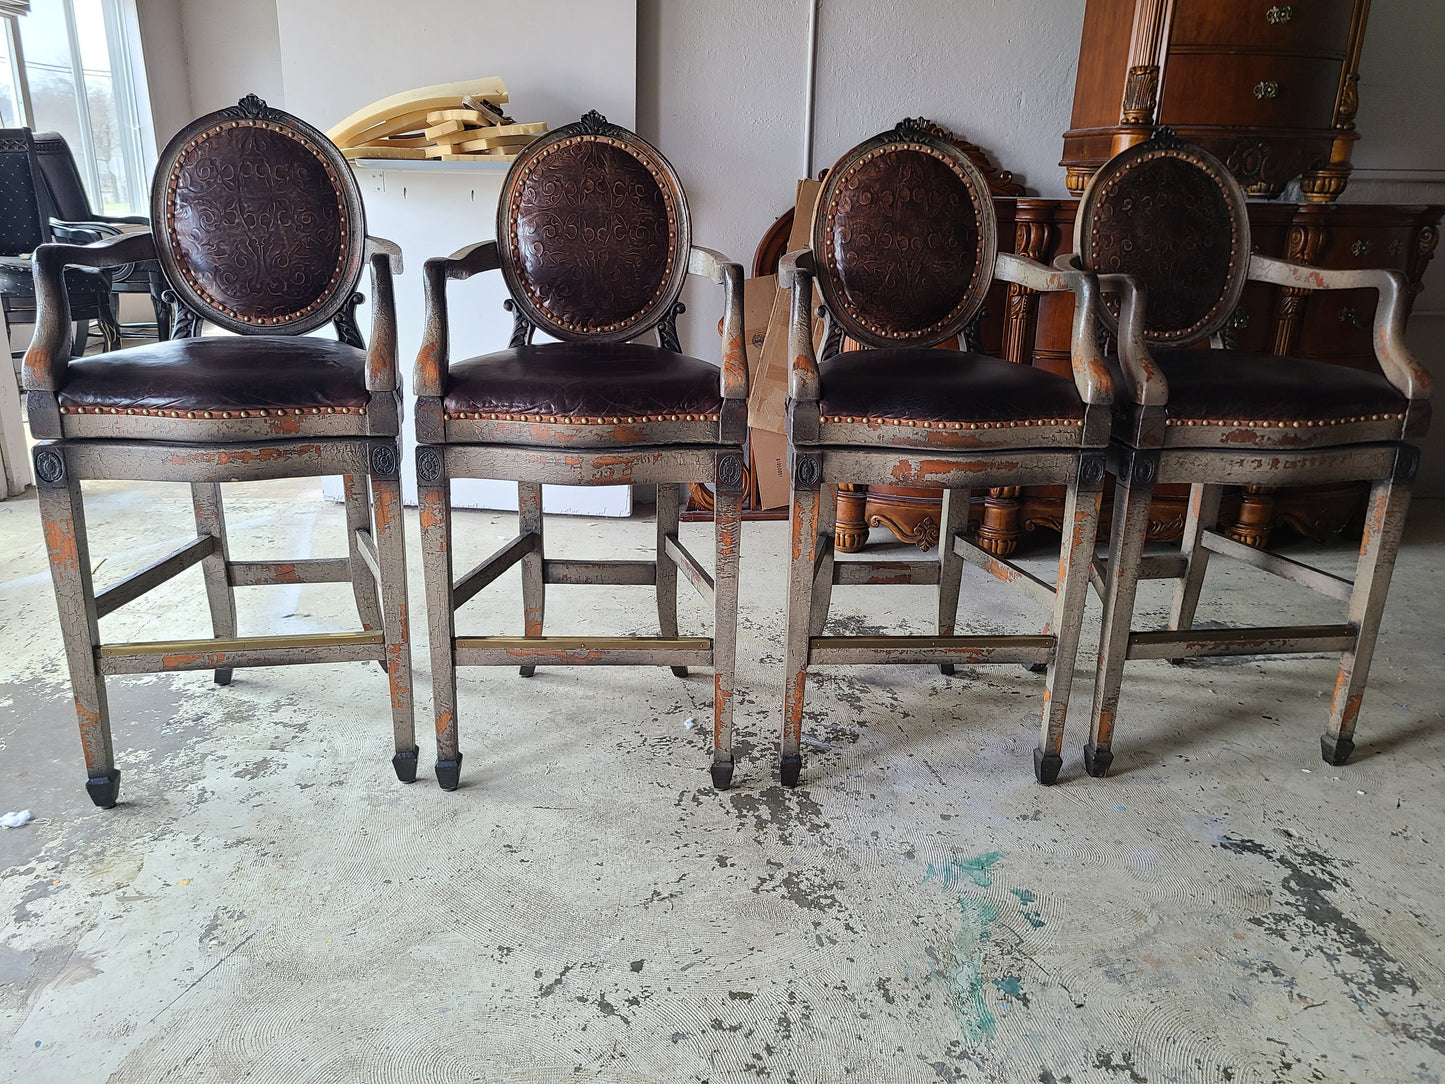 French Barstools Set (4)  - SOLD